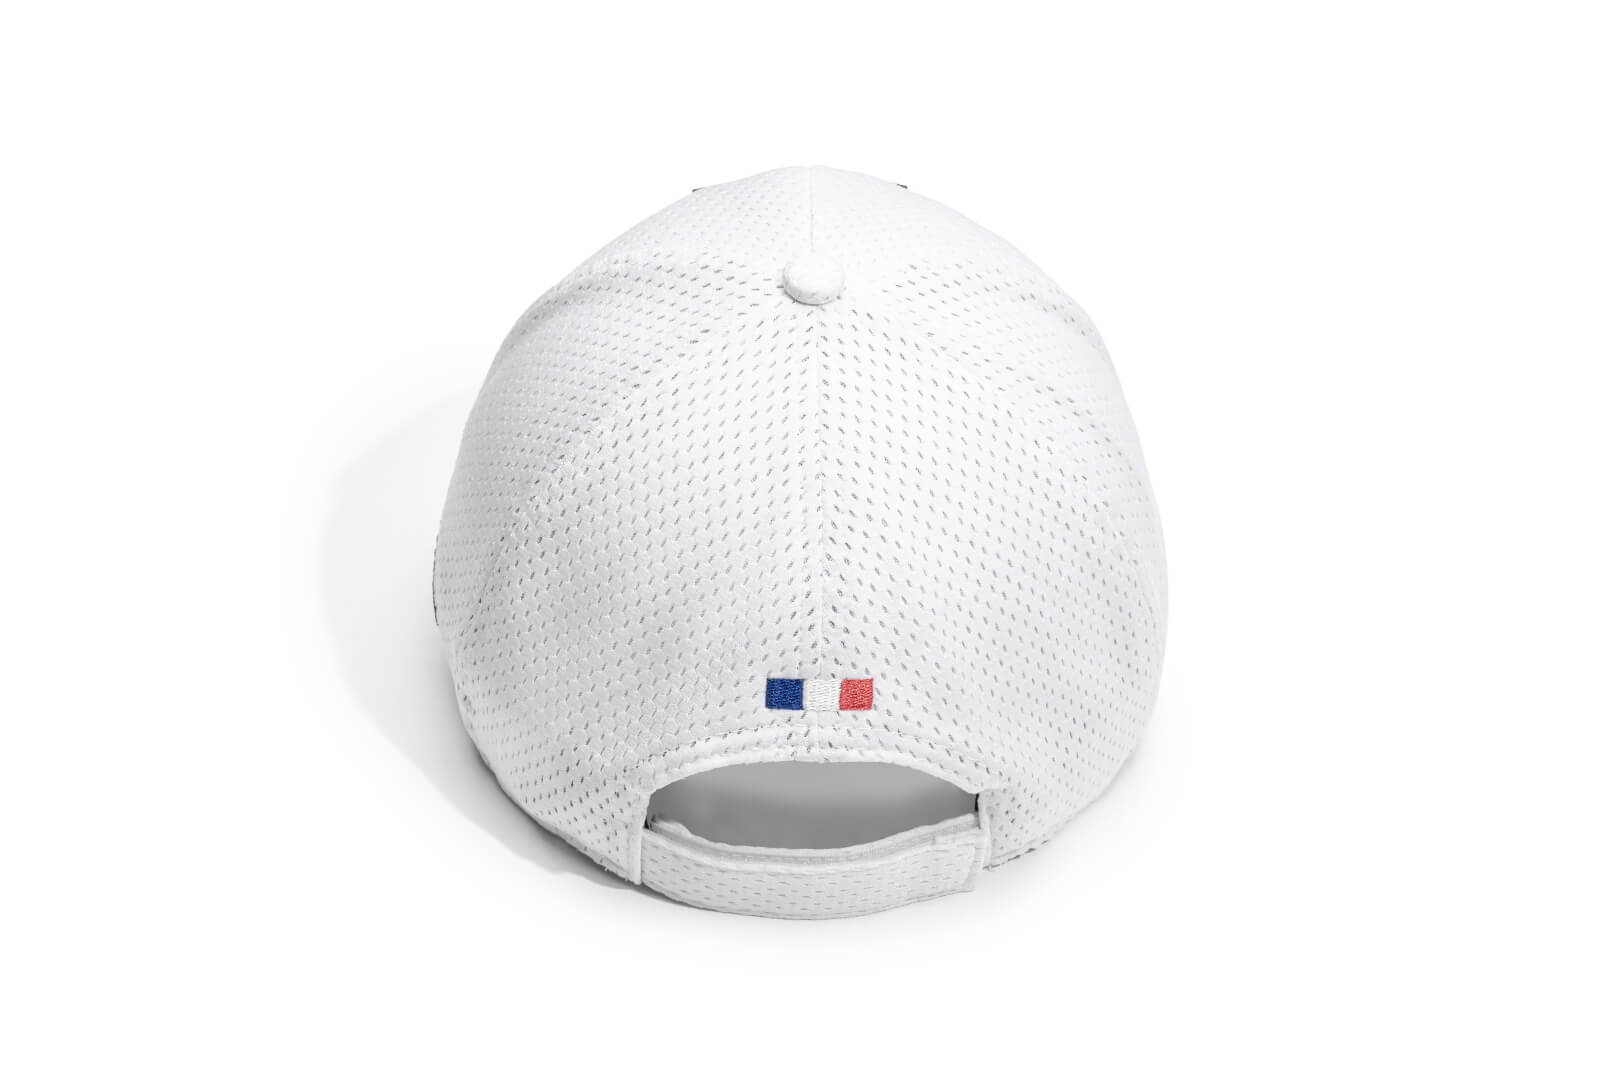 Ciryl Gane x Nobis 5-Panel Adjustable Cap in 5-panel jersey construction, curved brim, adjustable strap at back, tonal black Nobis shield logo attached on crown front, "Bon Gamin" embroidered on the left, and flag of France embroidered on the back, in White